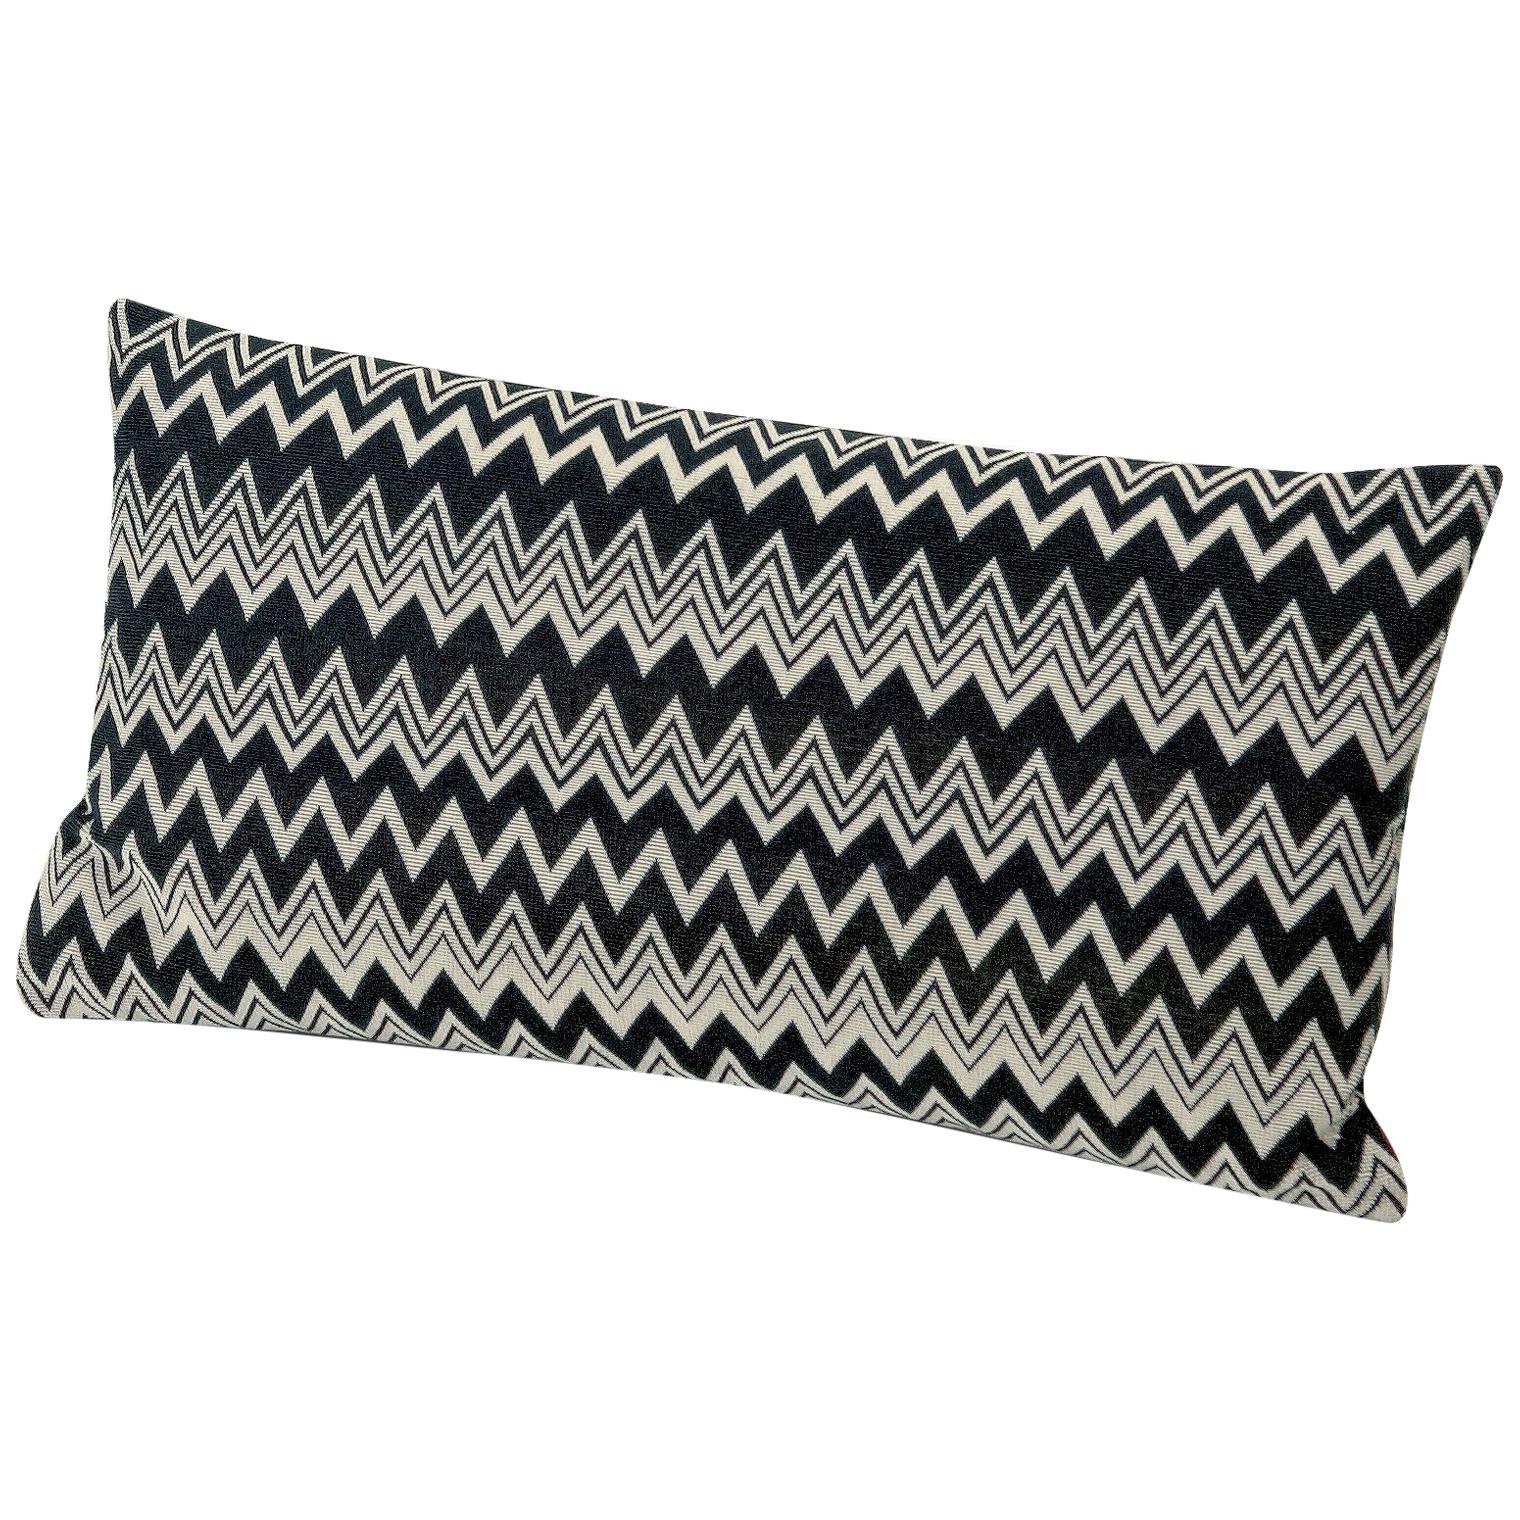 Missoni Home Orvault Cushion in Black and White Chevron Print